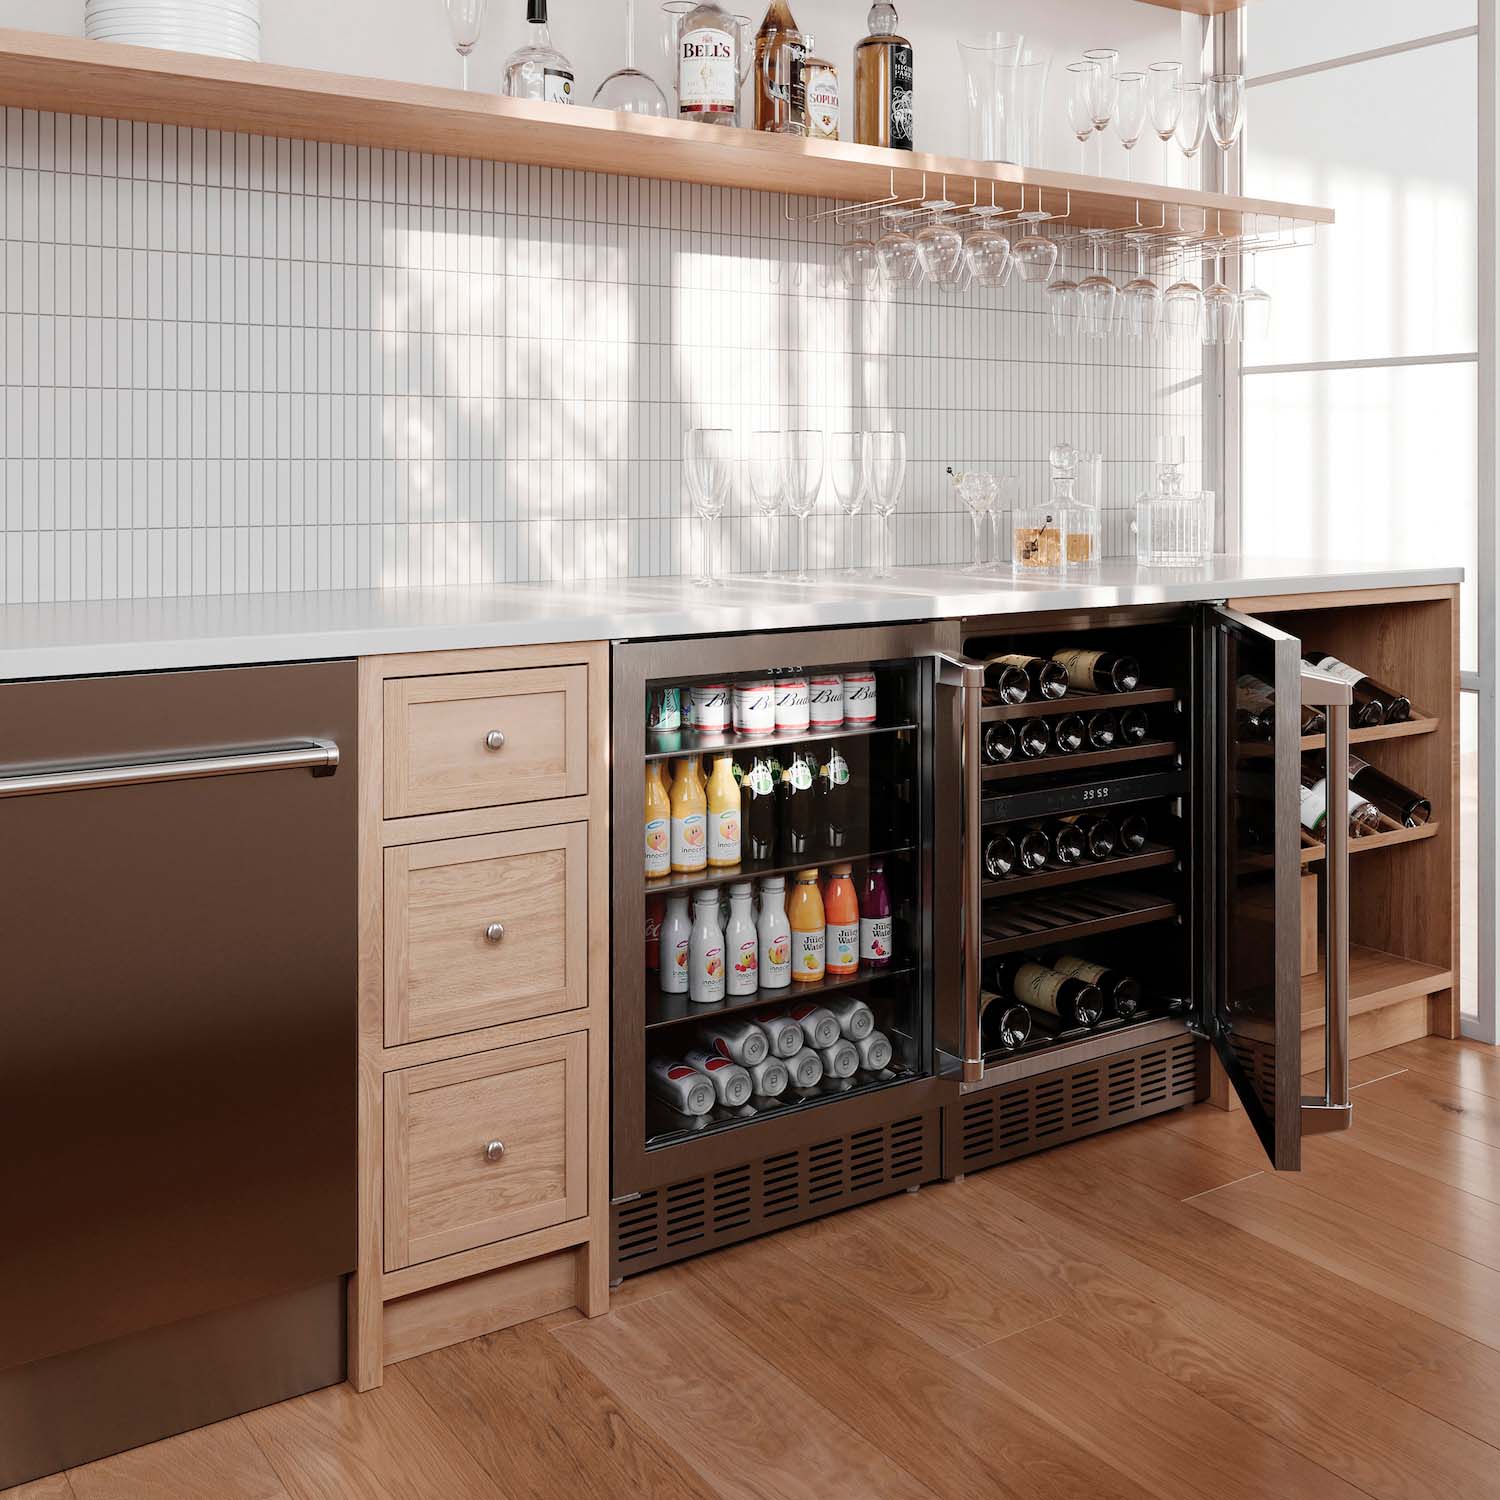 ZLINE 24 in. Monument 154 Can Beverage Fridge in Stainless Steel (RBV-US-24) and ZLINE 24 In. Monument Dual Zone 44-Bottle Wine Cooler in Stainless Steel with Wood Shelf (RWV-UD-24) side-by-side in a wood themed pantry and mini bar area with wine cooler door open.